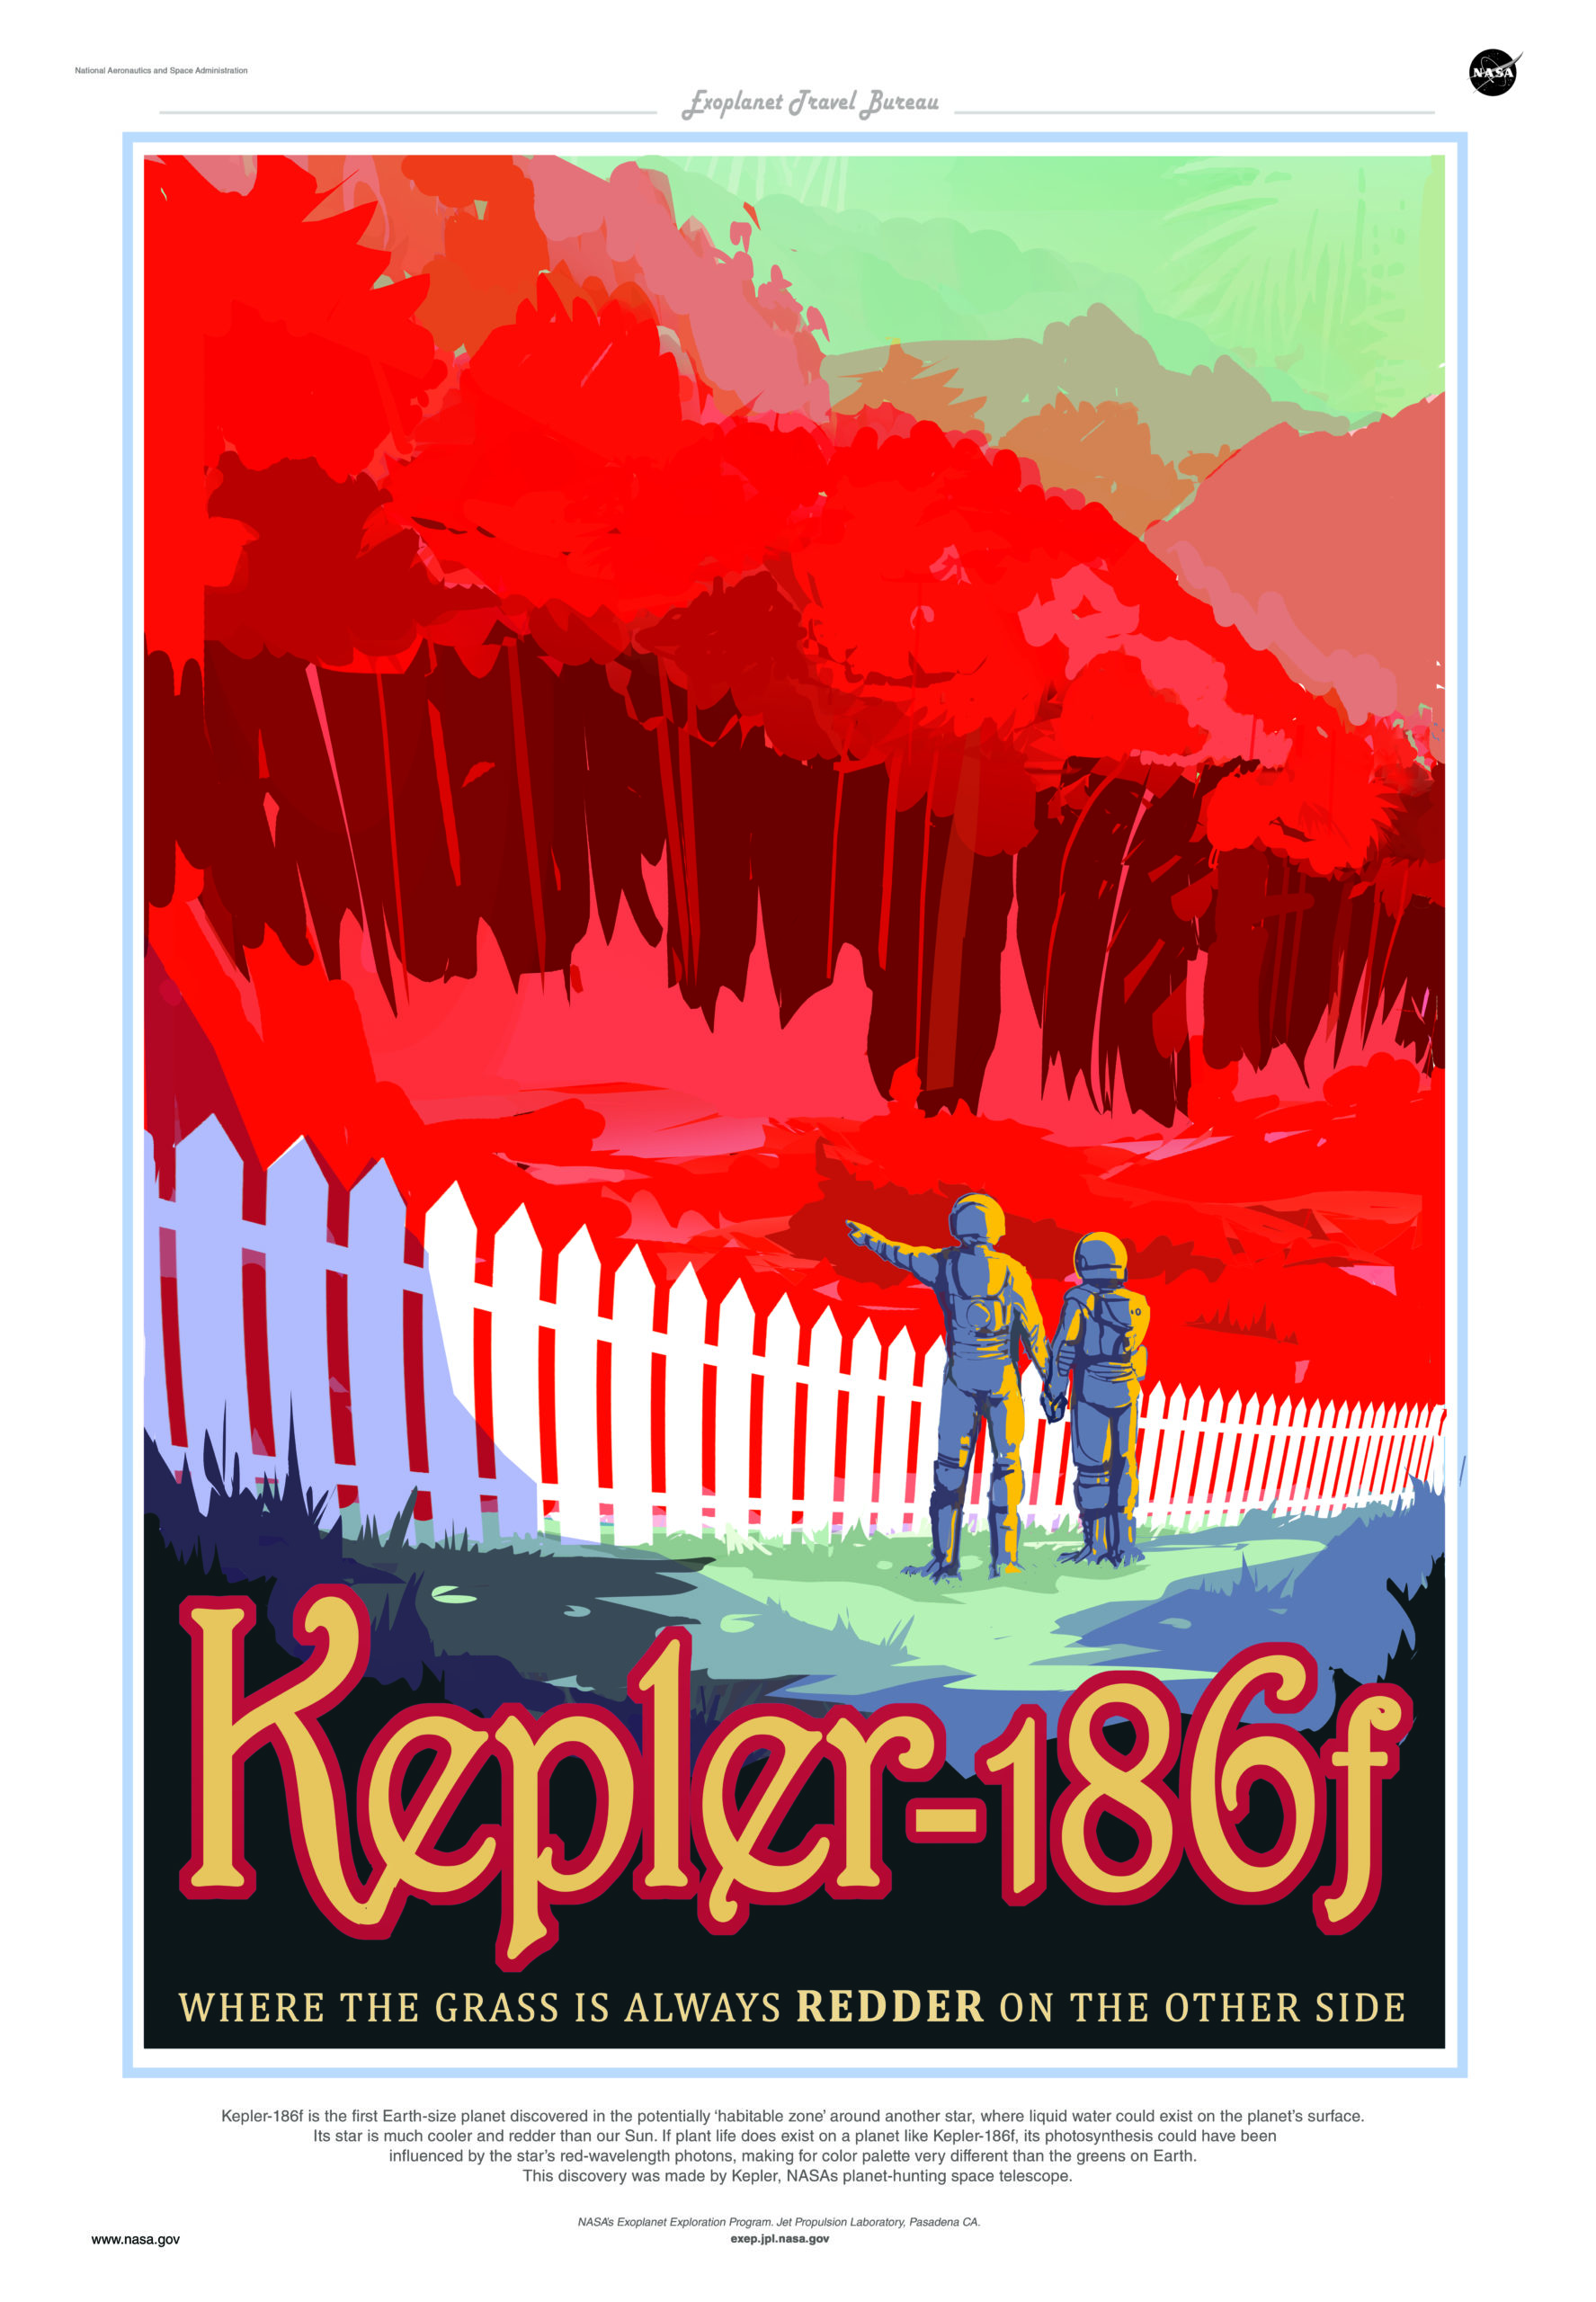 NASA Made These Gorgeous Travel Posters For Actual Exoplanets